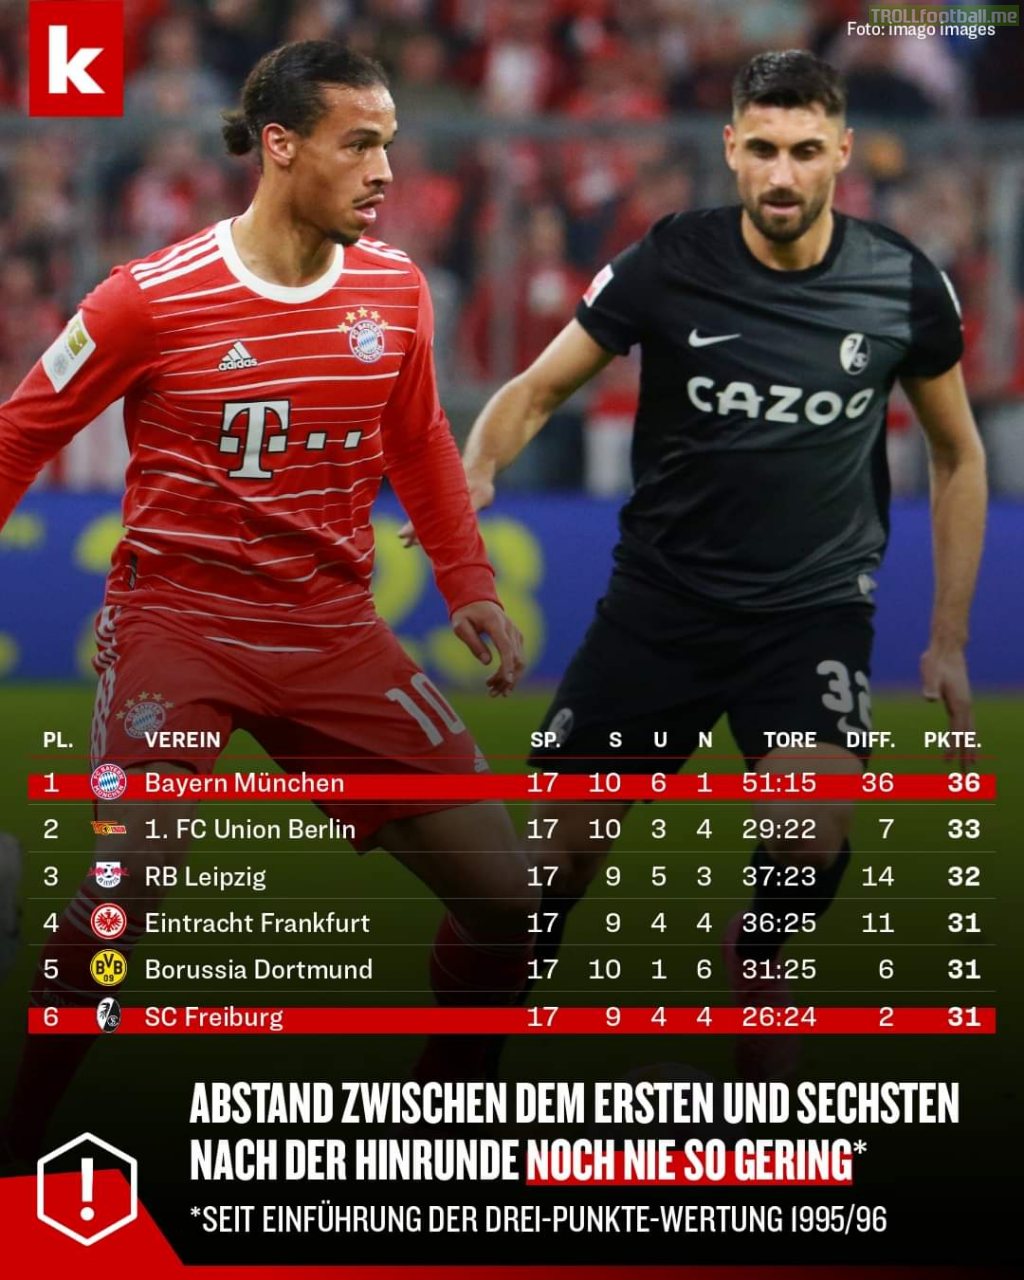 There are only five points between the Bundesliga table leaders Bayern Munich and sixth-placed SC Freiburg. Since the introduction of the three-point ranking in 1995/96, the gap after the first half of the season has never been so small.